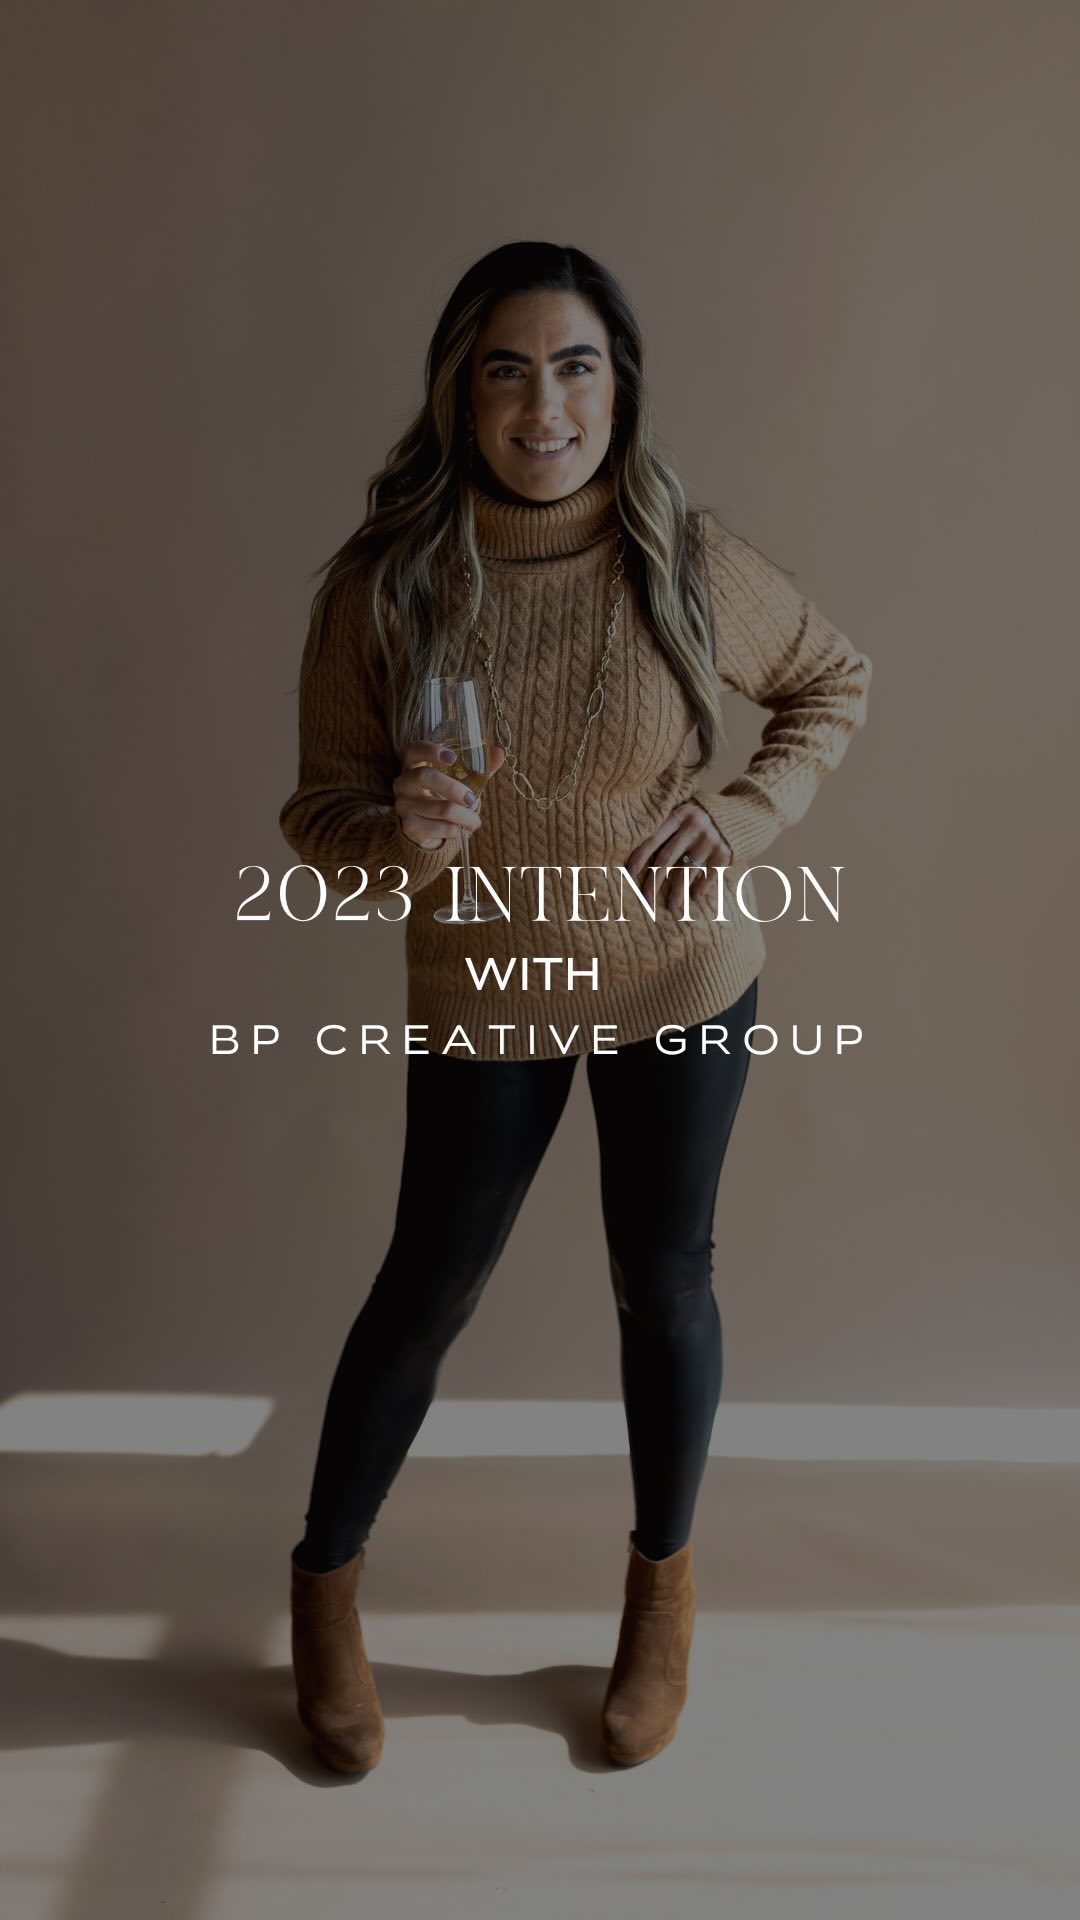 2023 Here We Come 

No more negativity, fear or second guessing. 

We’ve got courage, energy and fierceness. 

What about you 👇🏾👇🏼👇🏻 

#goals #goalsetting #goalgetter #brandstrategy #brandstrategist #brandstrategymatters #brandambassador #brandingkc #marketingkc #intentionalliving #intentionsetting #goals2023 #2023 #businessstrategy #businessgoals #businesstips #brandconsultant #goodvibesonly